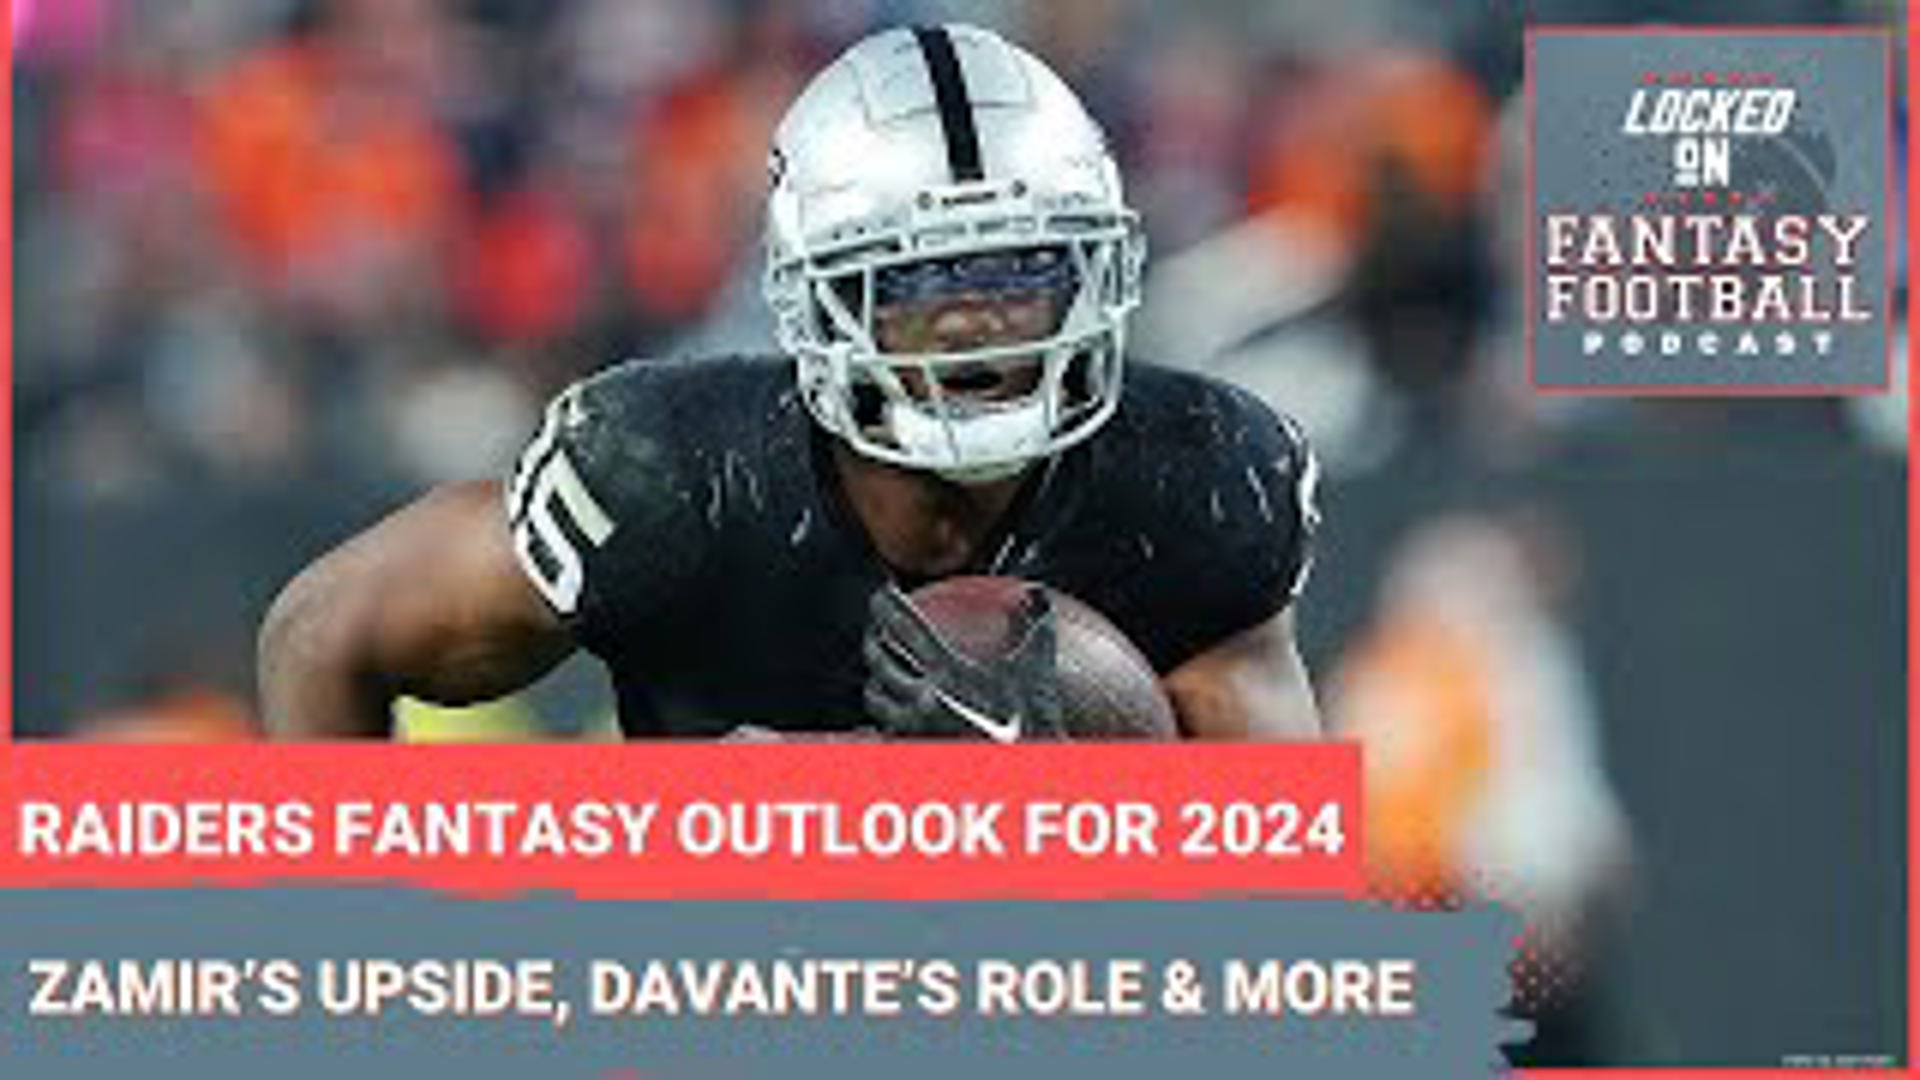 Sporting News.com's Vinnie Iyer and NFL.com's Michelle Magdziuk break down the fantasy football potential of the 2024 Las Vegas Raiders.